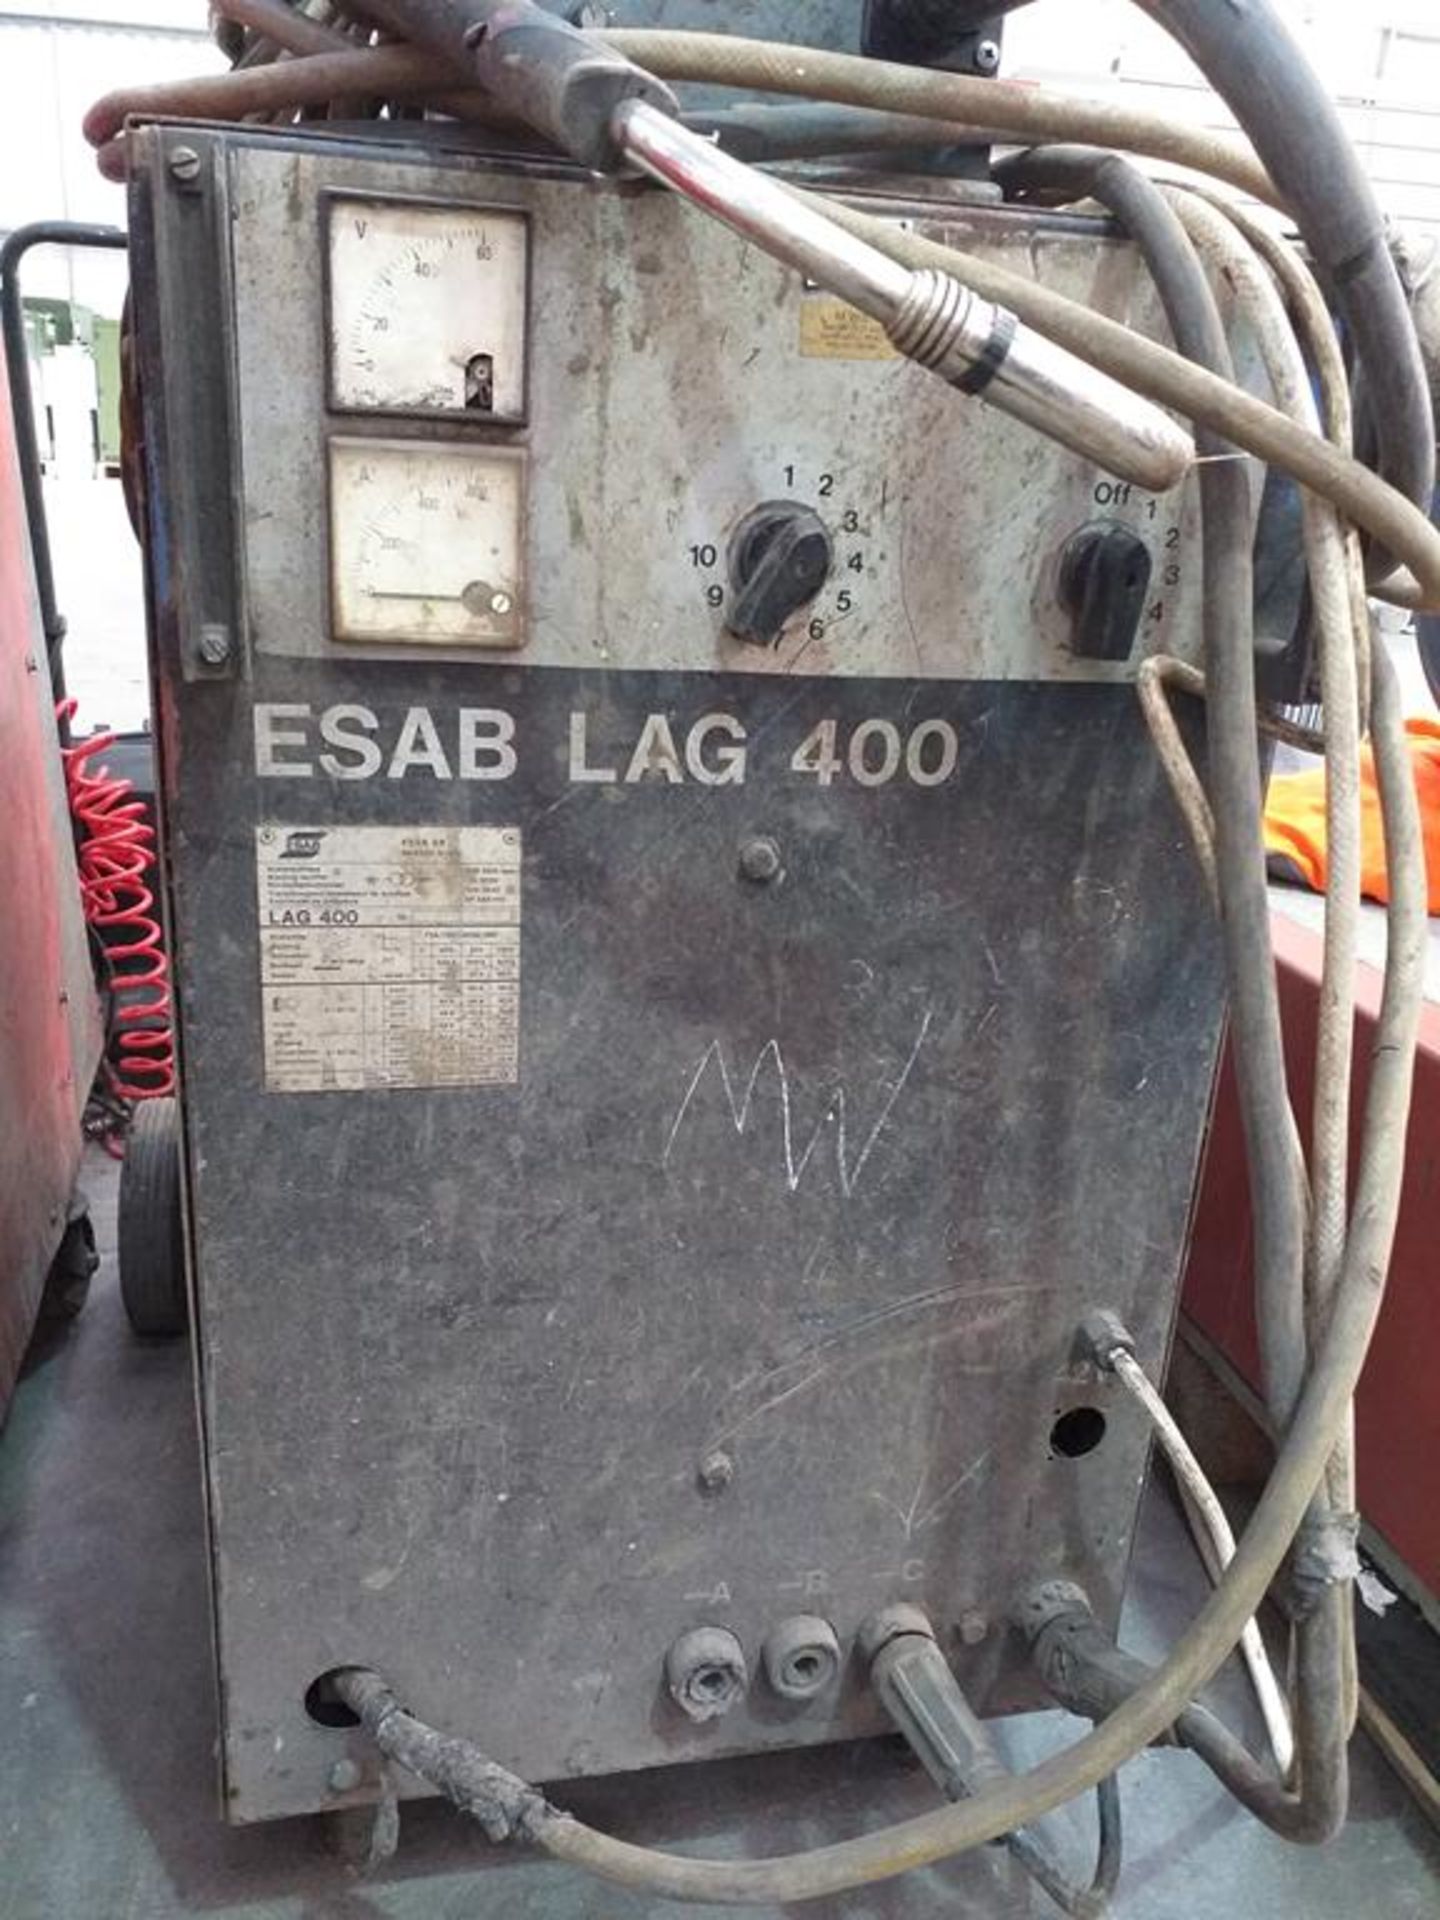 An ESAB Lag 400 3PH Welder complete with Wire Feed - Image 3 of 5